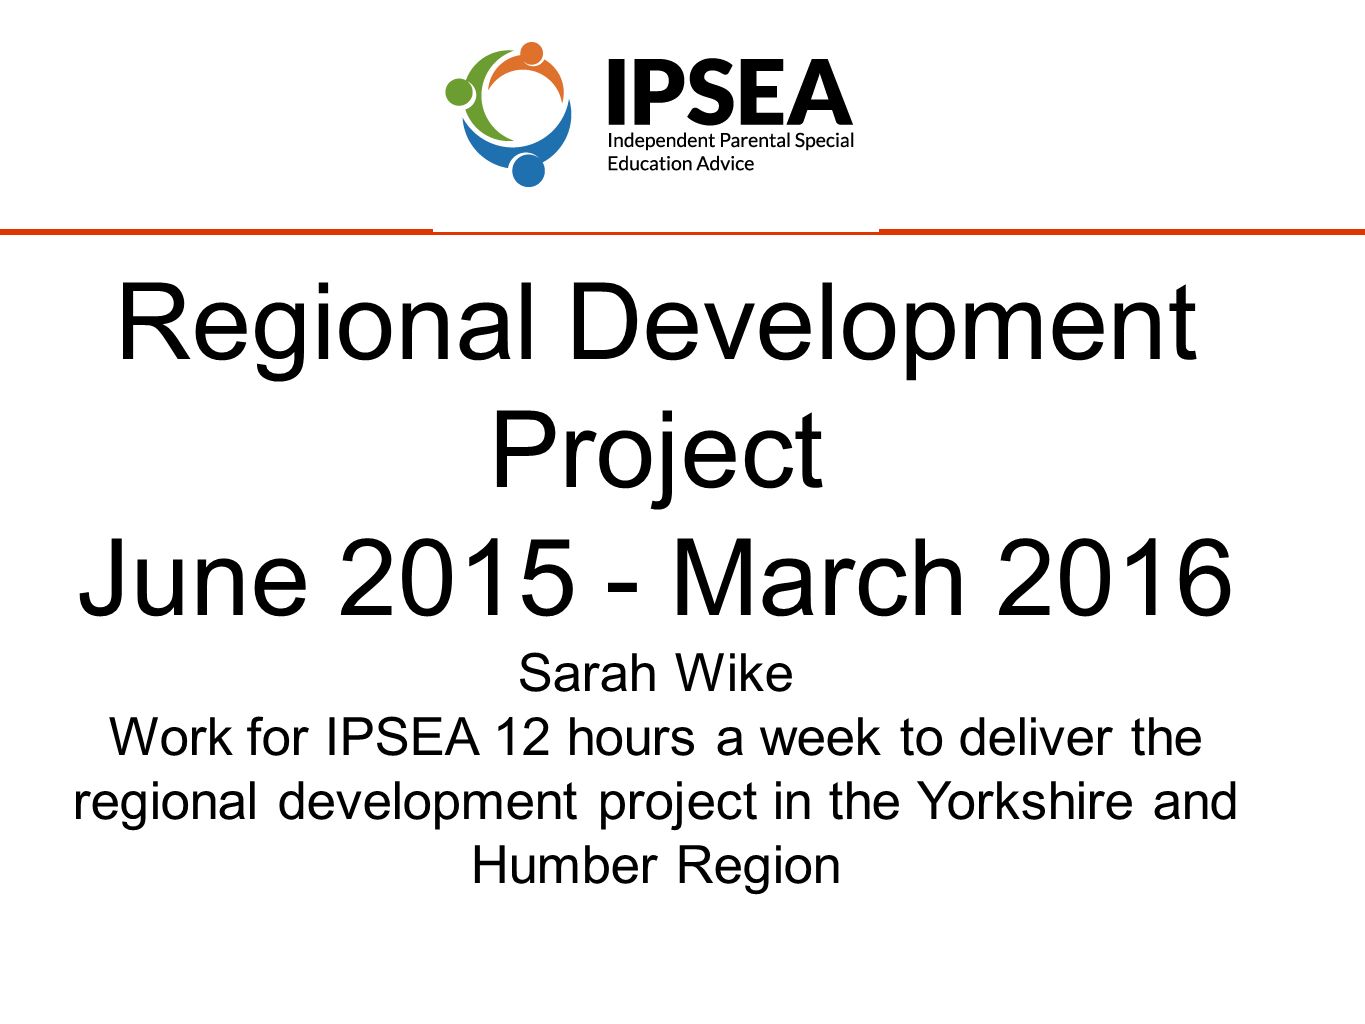 Regional Development Project June March 2016 Sarah Wike Work for IPSEA 12 hours a week to deliver the regional development project in the Yorkshire and Humber Region